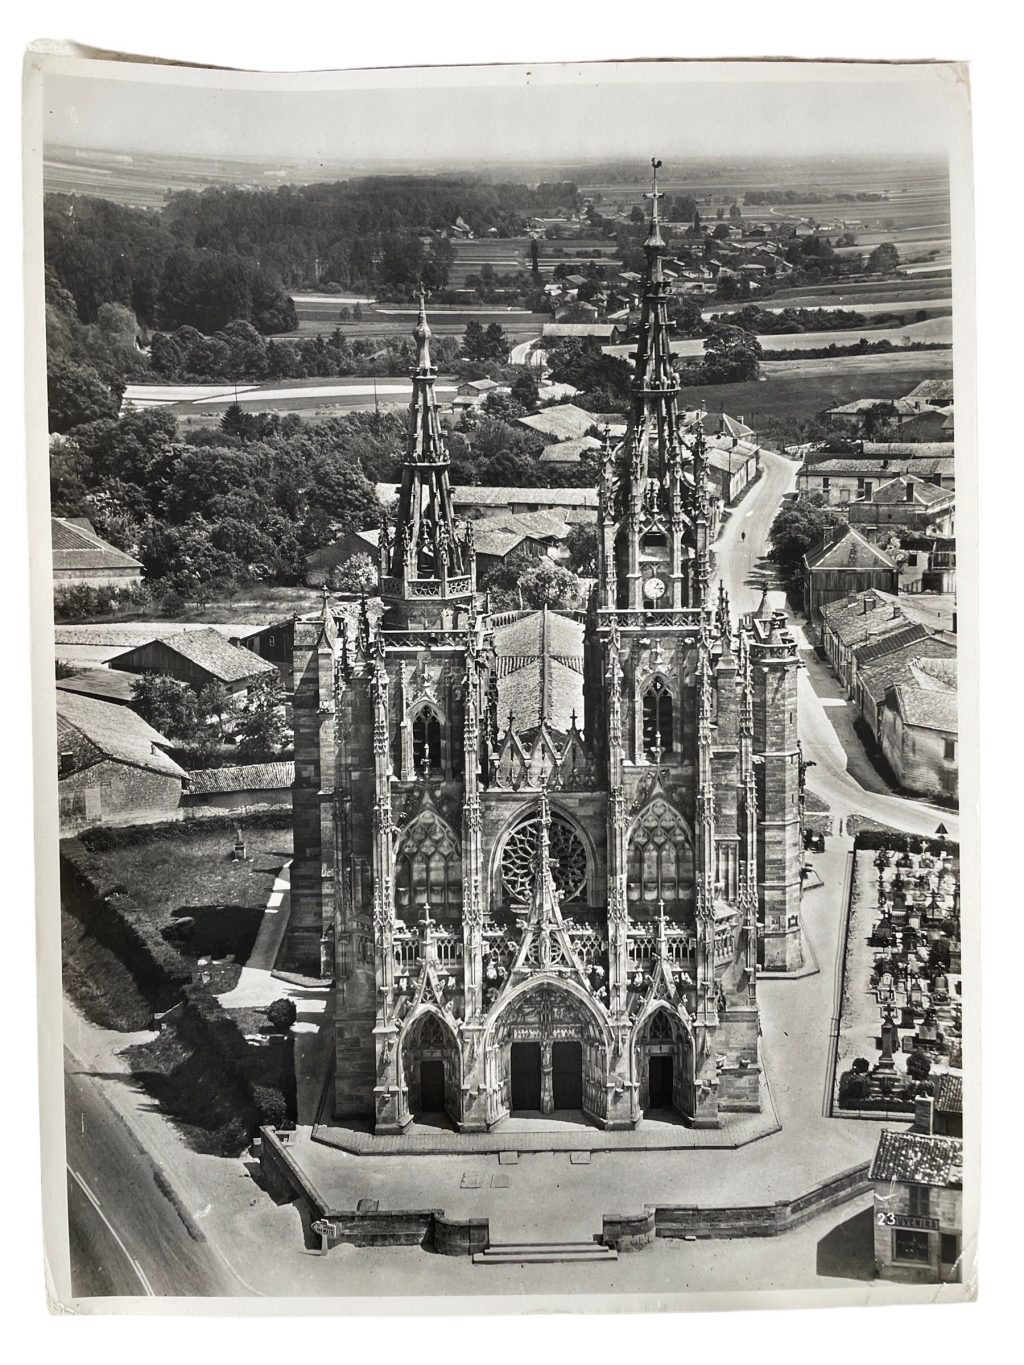 Vintage French Aerial Photo Print L’Epine En Champagne Eglise Church Architecture Lapie Collection 23 Framing Display Photo c1950’s